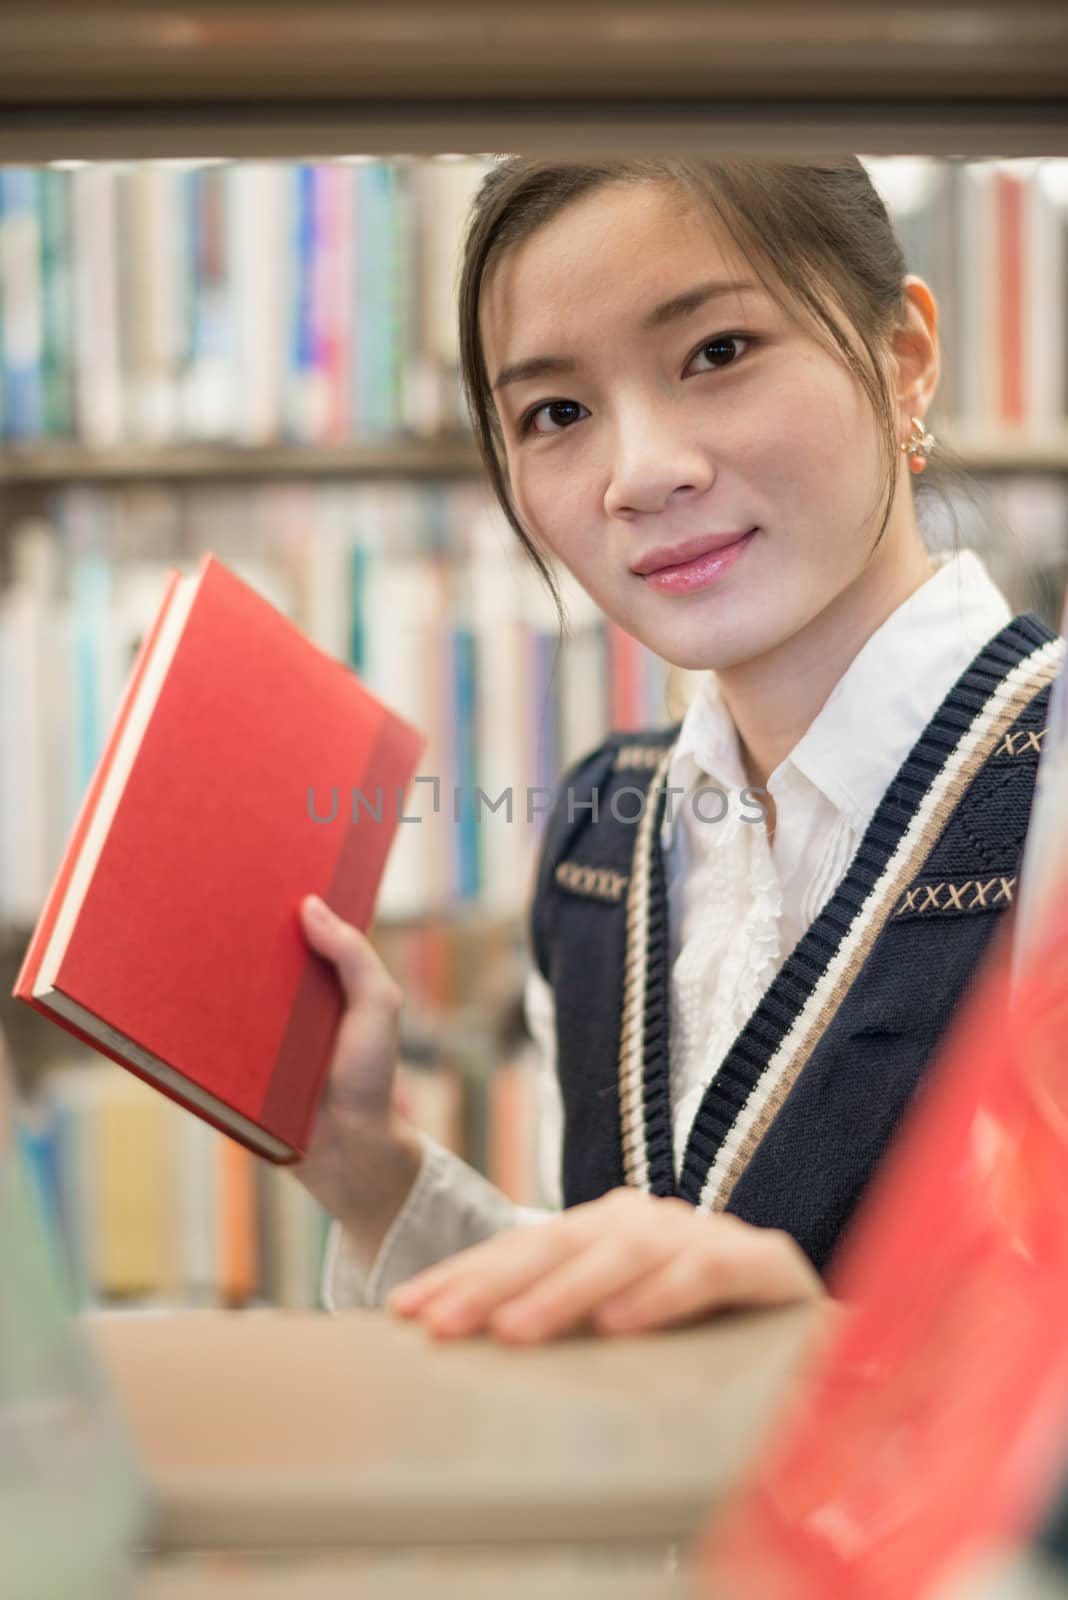 Pretty young girl picking out a red book from a pile of books on a bookshelf in library